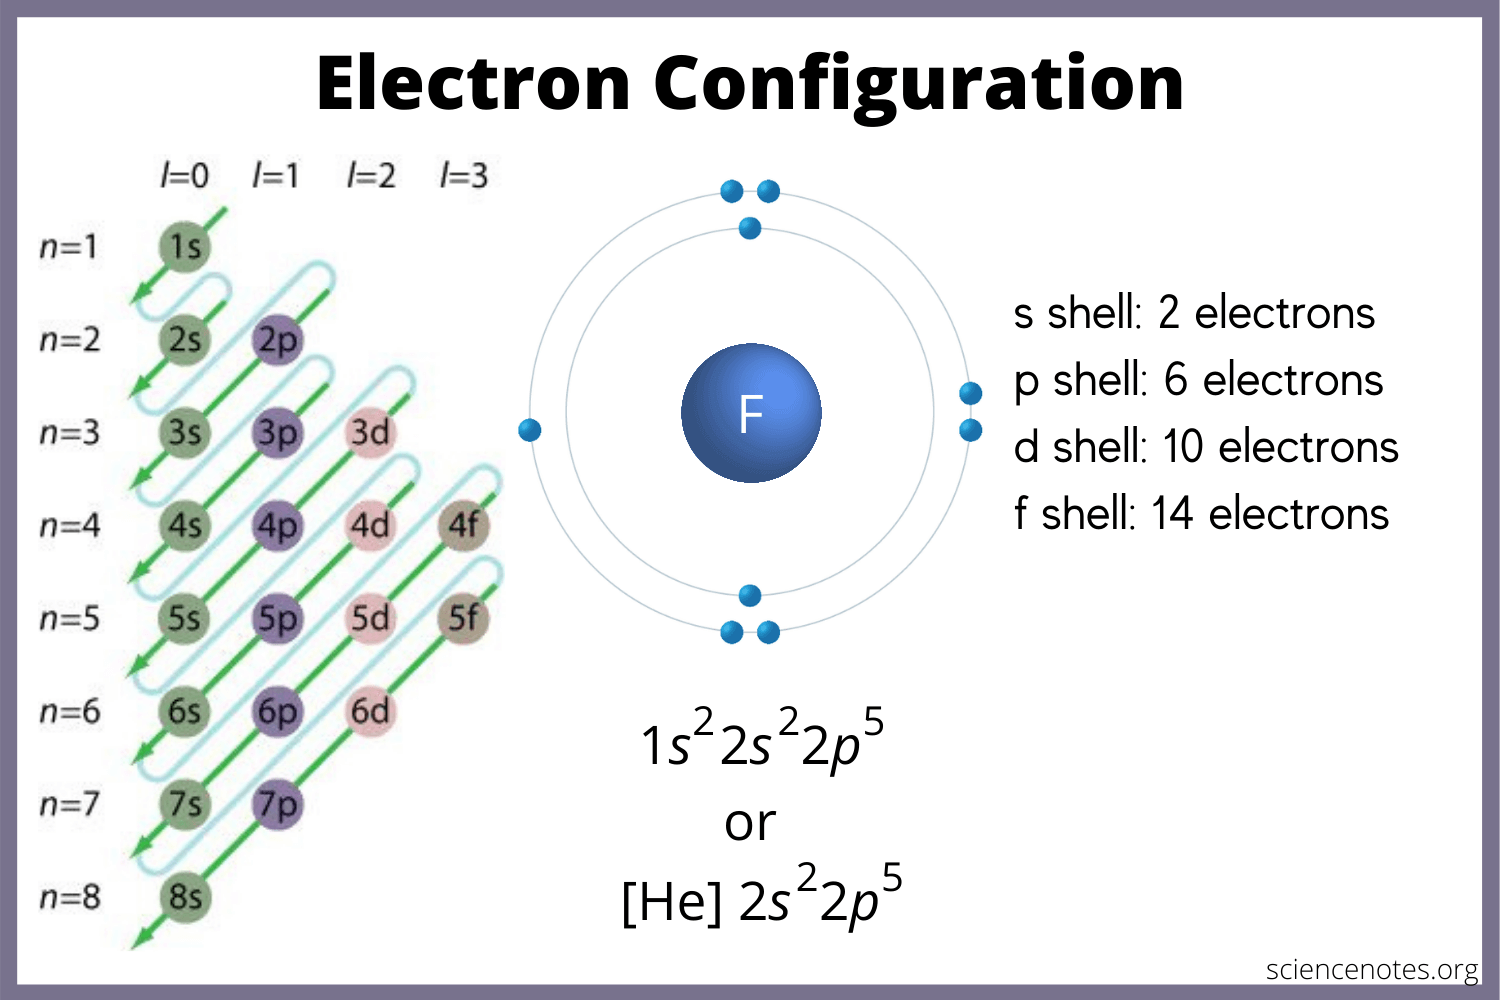 <p>electrons are distributed in the electron cloud into principal energy levels (1, 2, 3..), sublevels (s, p, d, f), orbitals (s has 1, p has 3, d has 5, f has 7) and spin (2 electrons allowed per orbital)</p>